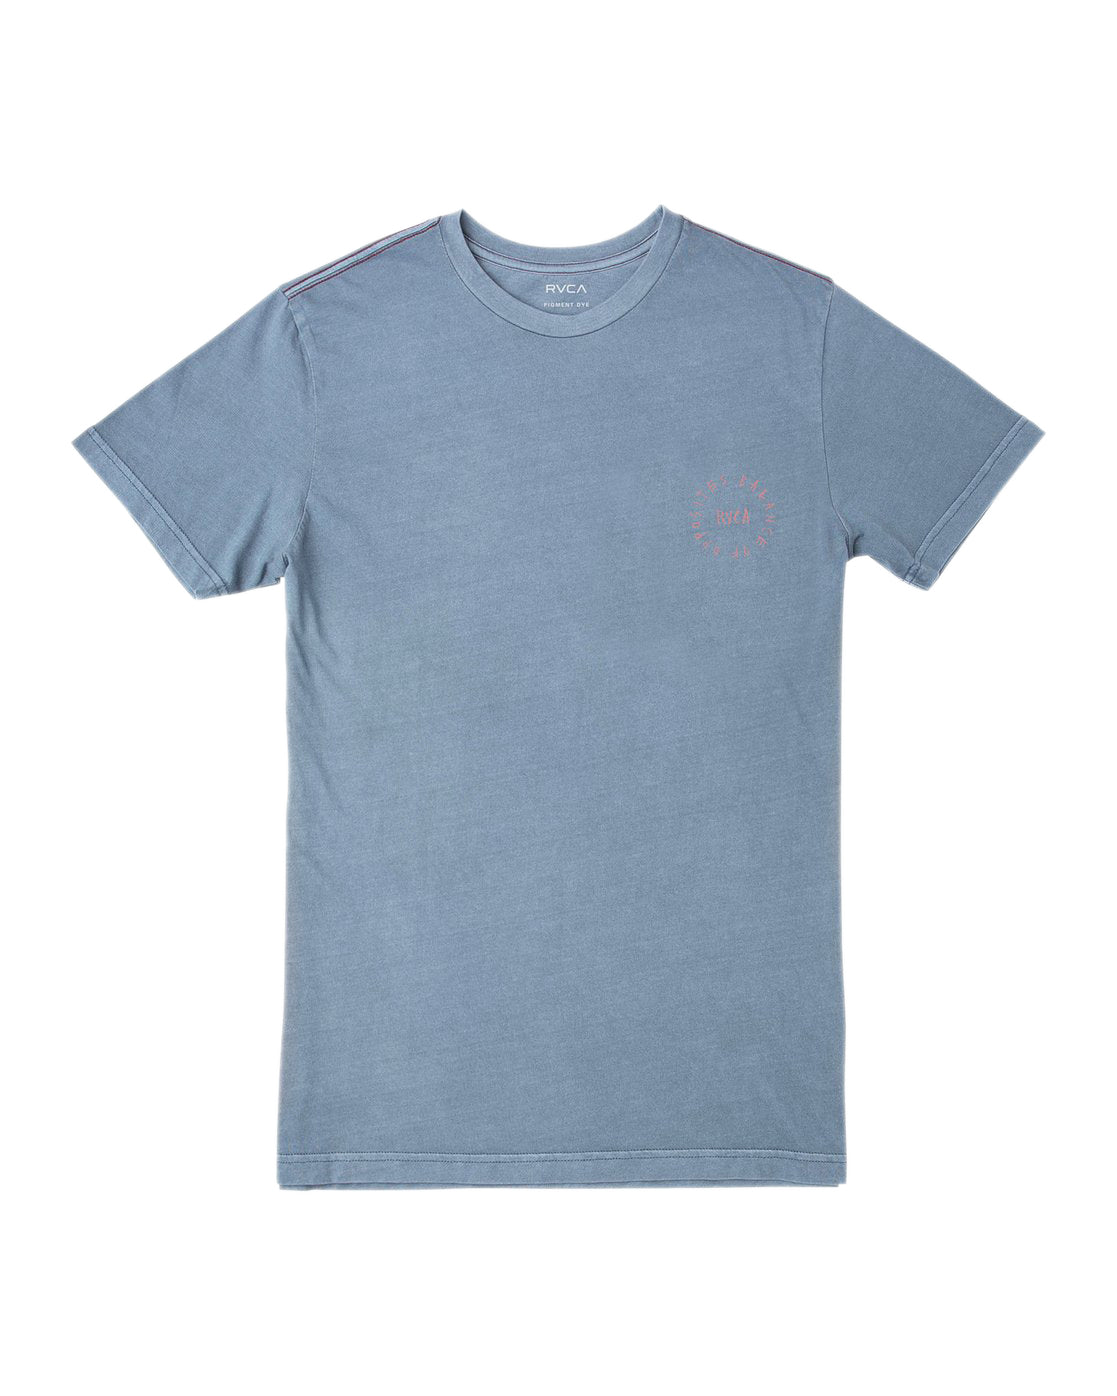 RVCA Hortonsphere SS Tee CNB-ChinaBlue L